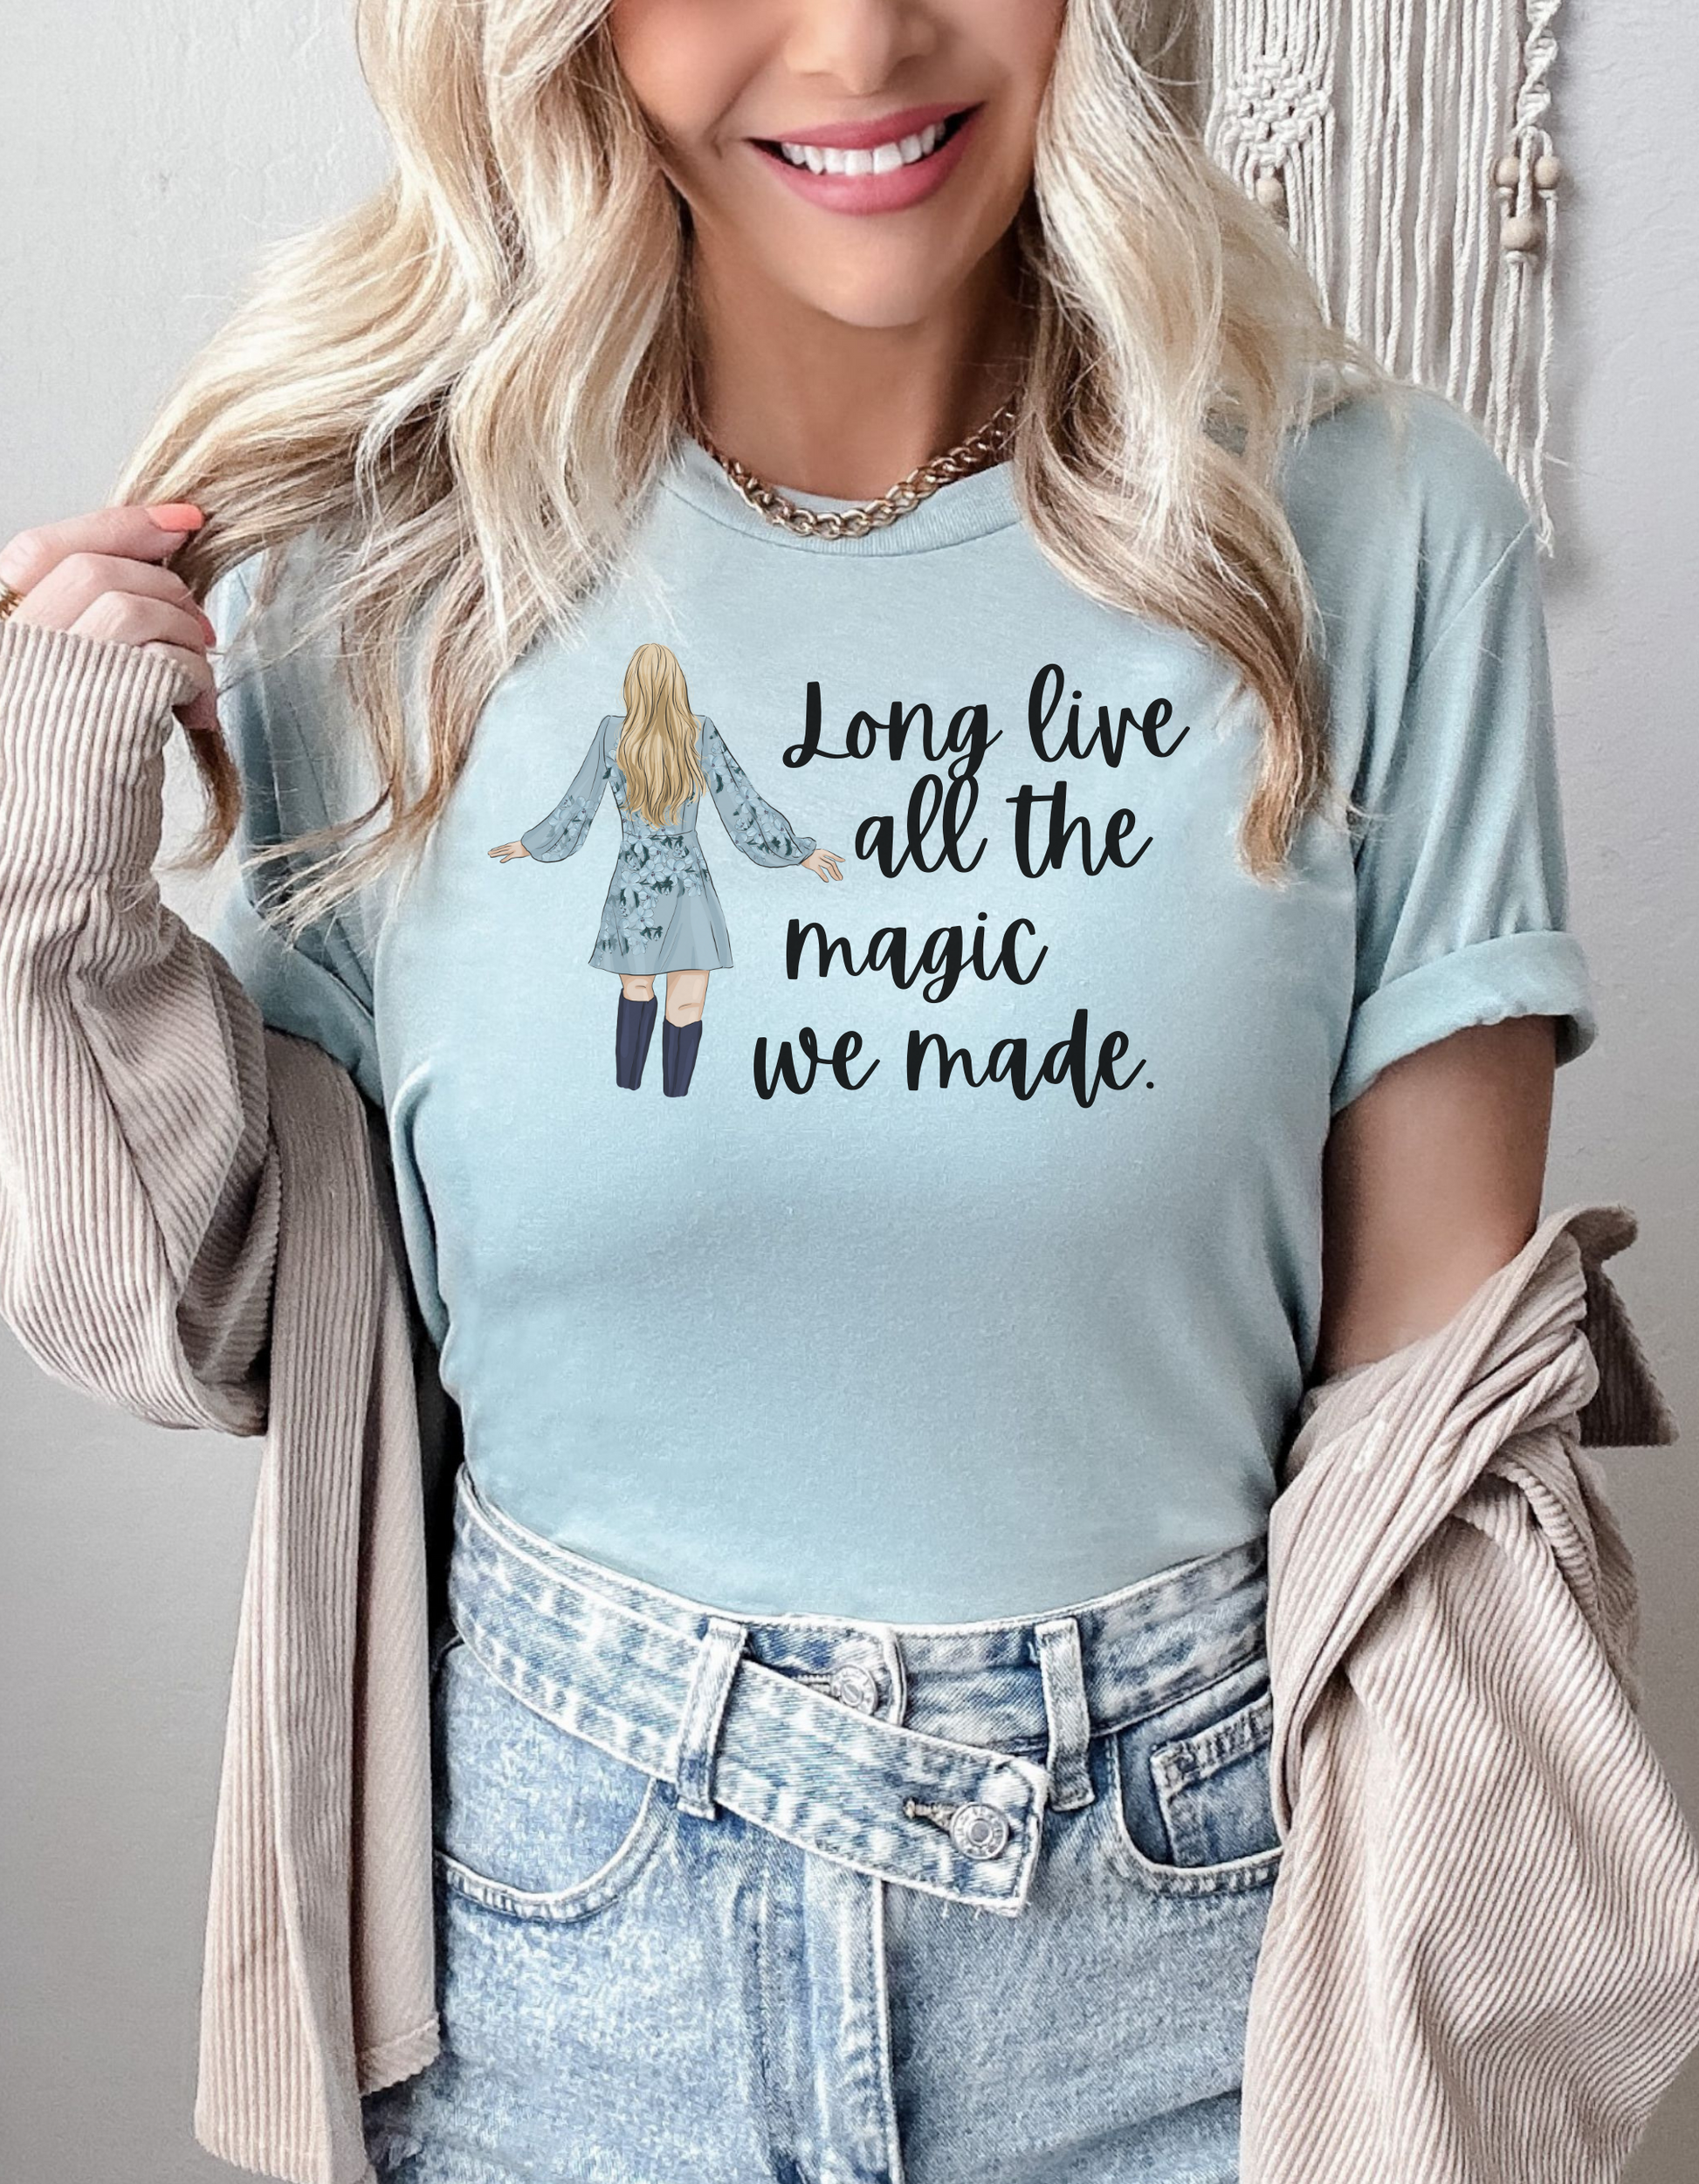 Taylor Swift Preppy Picture T-Shirt - Long Live All The Magic We Made T-Shirt    - Chickie Collective